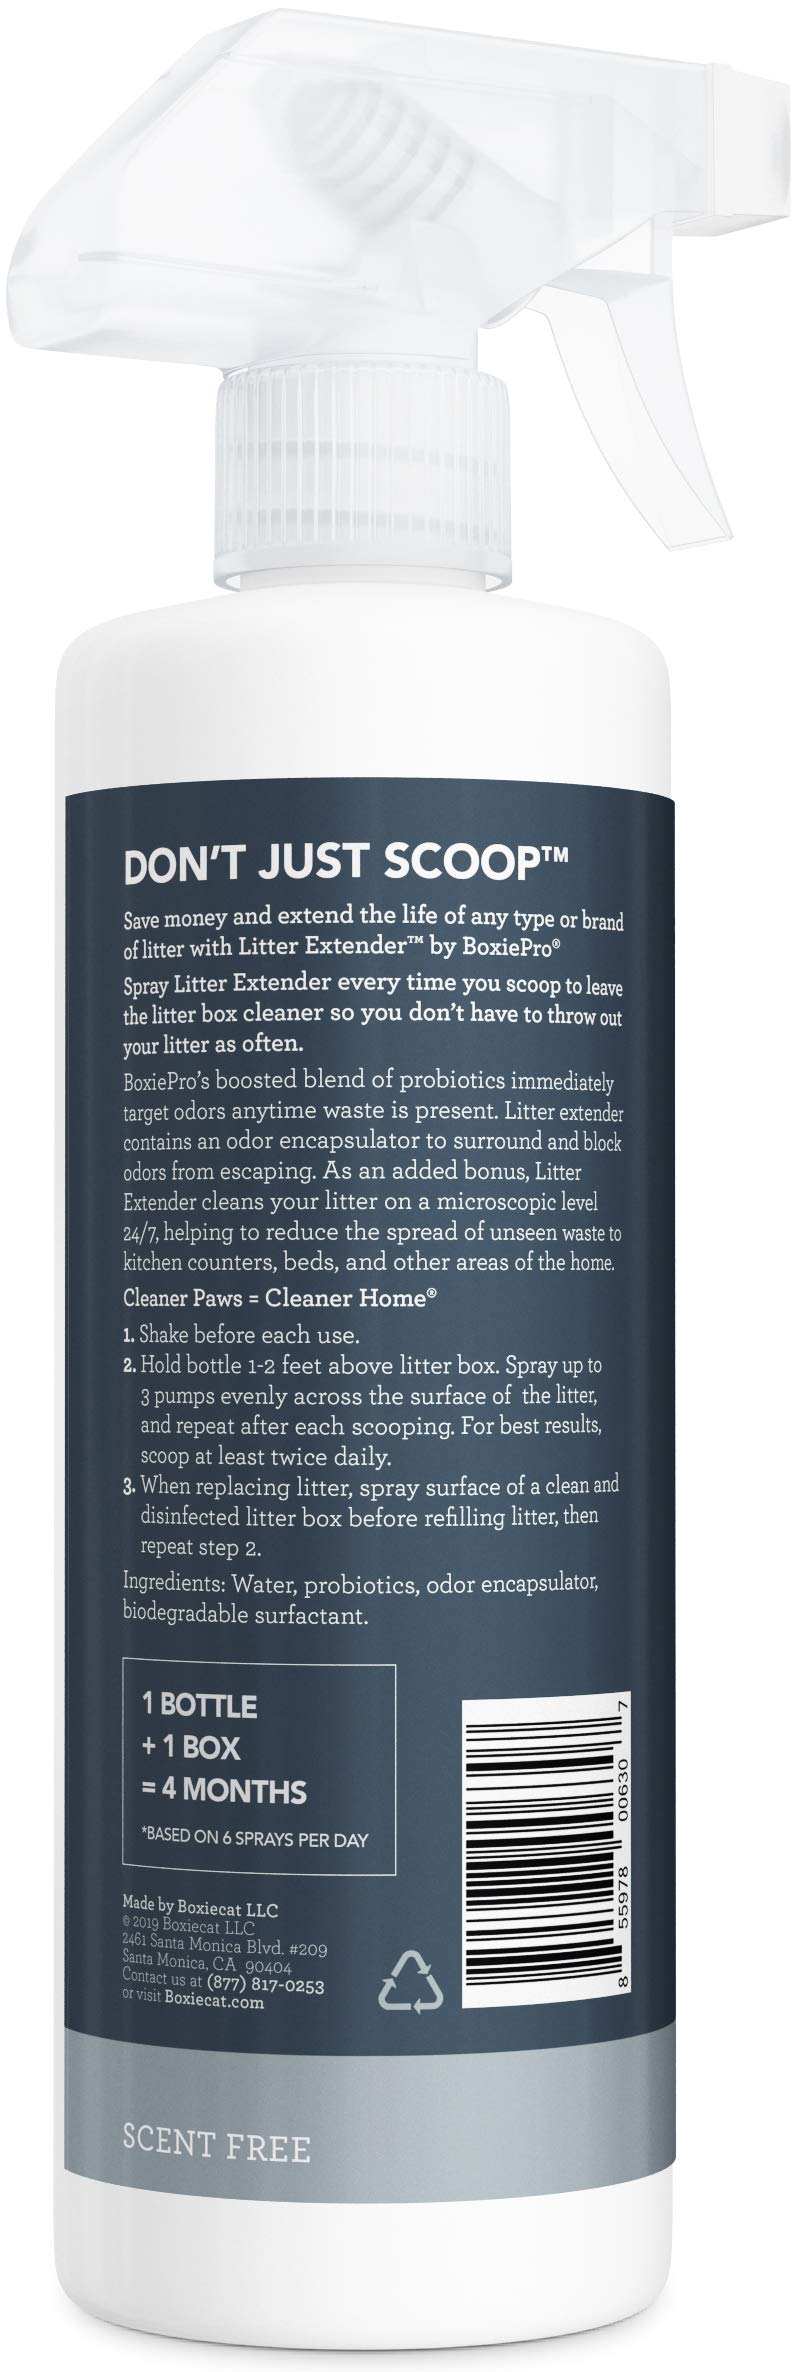 [Australia] - BoxiePro Scoop & Spray Litter Extender – Save Money & Extend the Life of Litter – Cleans Your Litter - Best Litter Box Odor Eliminator & Deodorizer – Natural Scent Free Odor Control 24 oz 